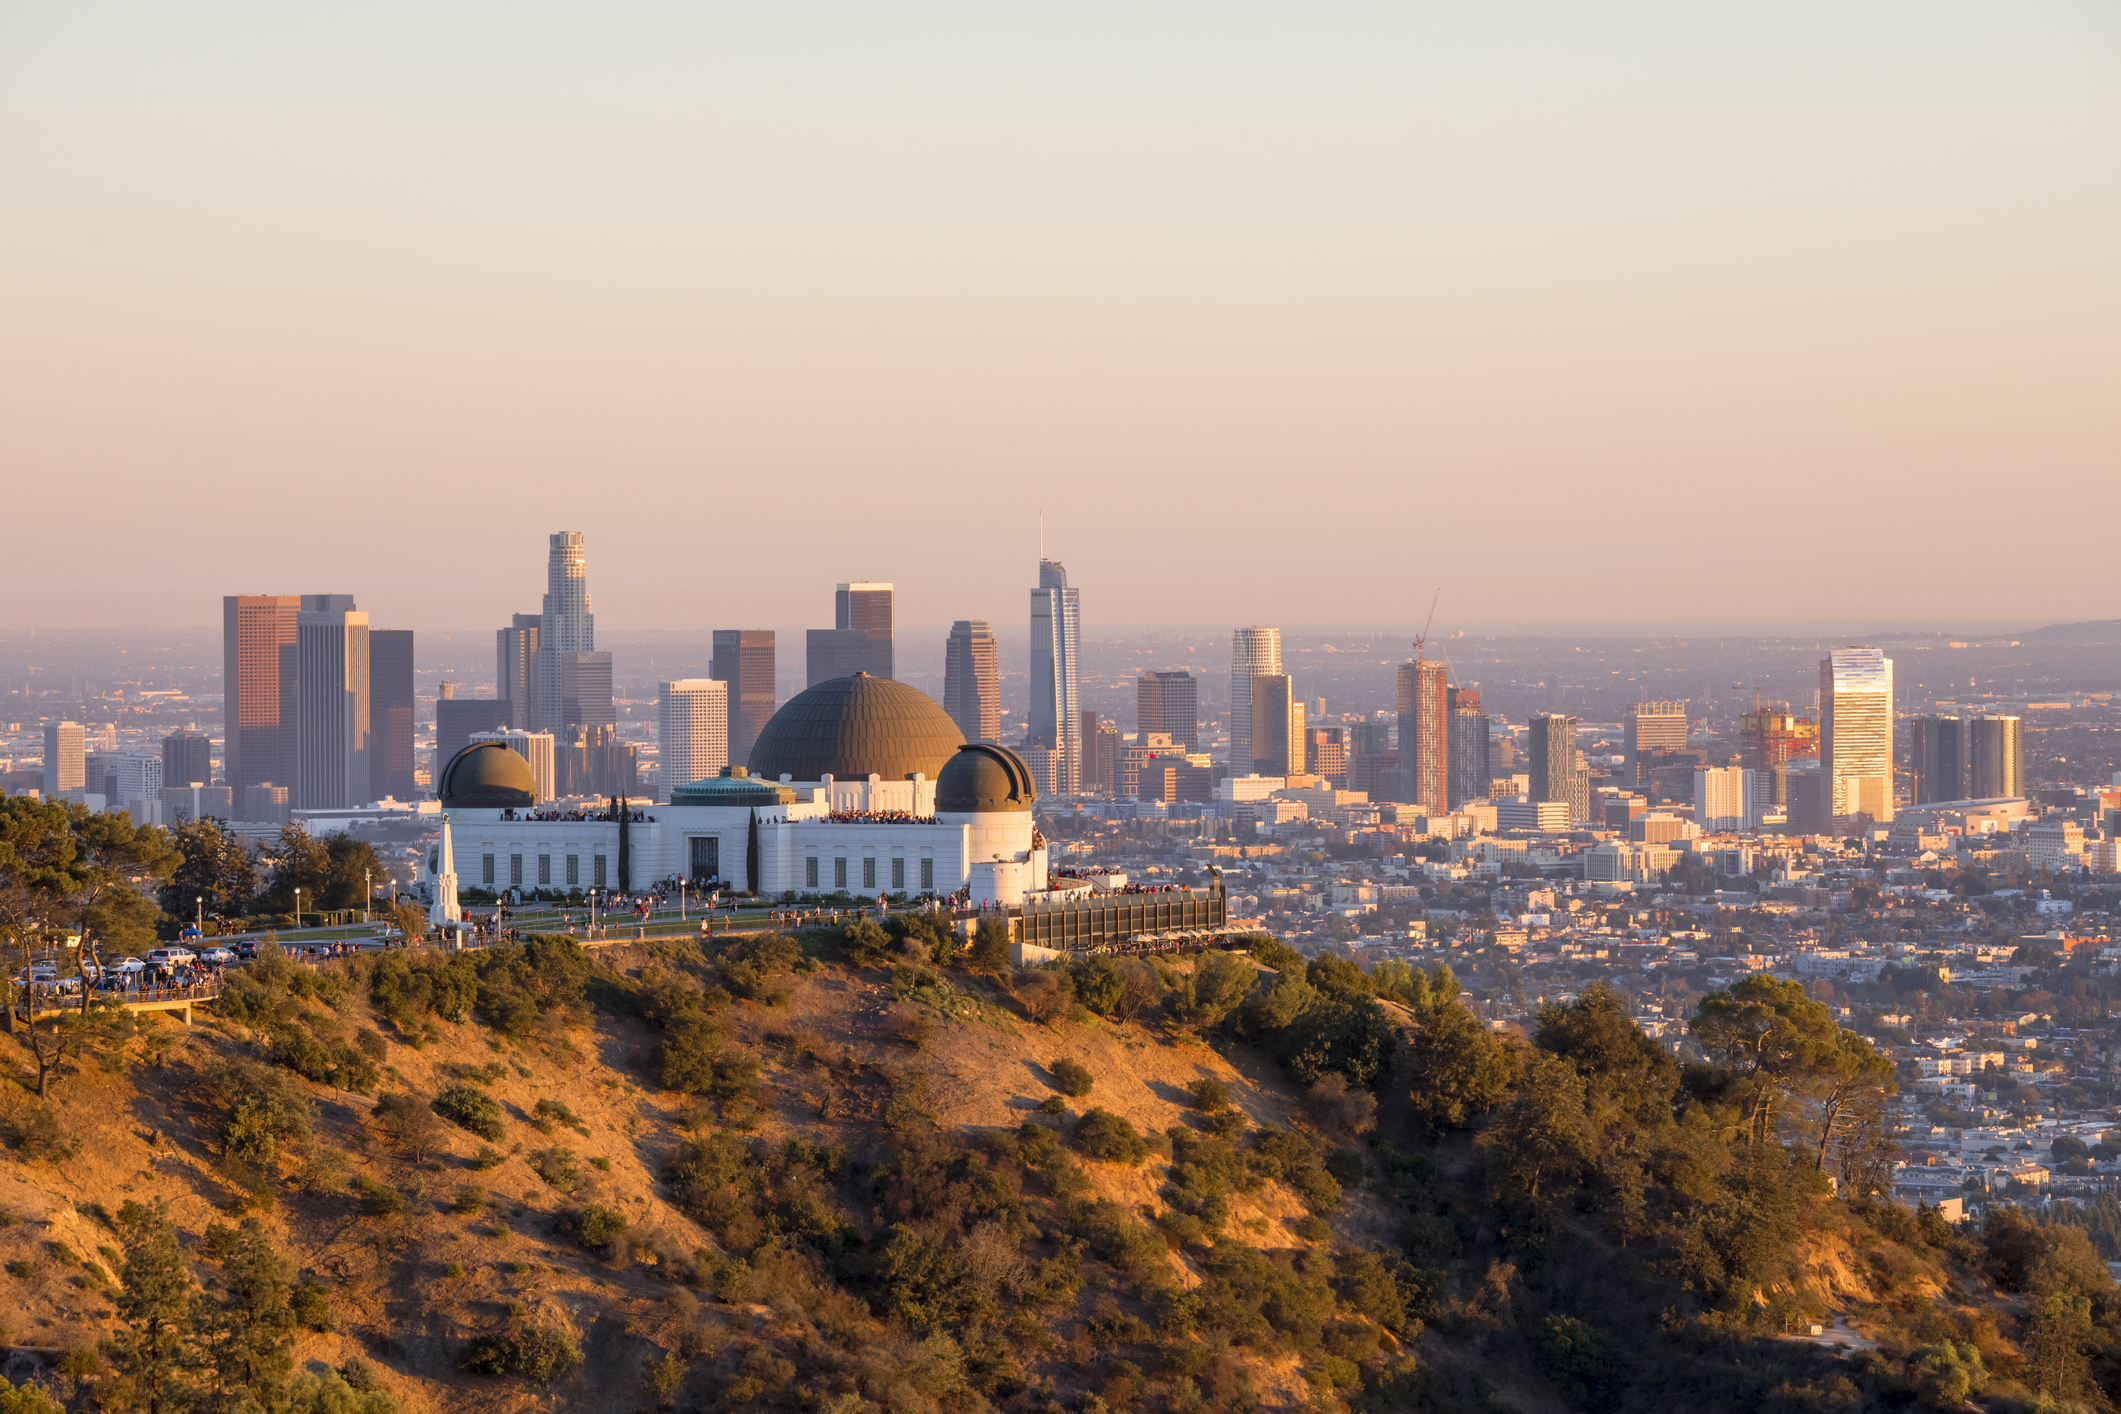 Los Angeles skyline at sunset with Griffith Observatory in the foreground